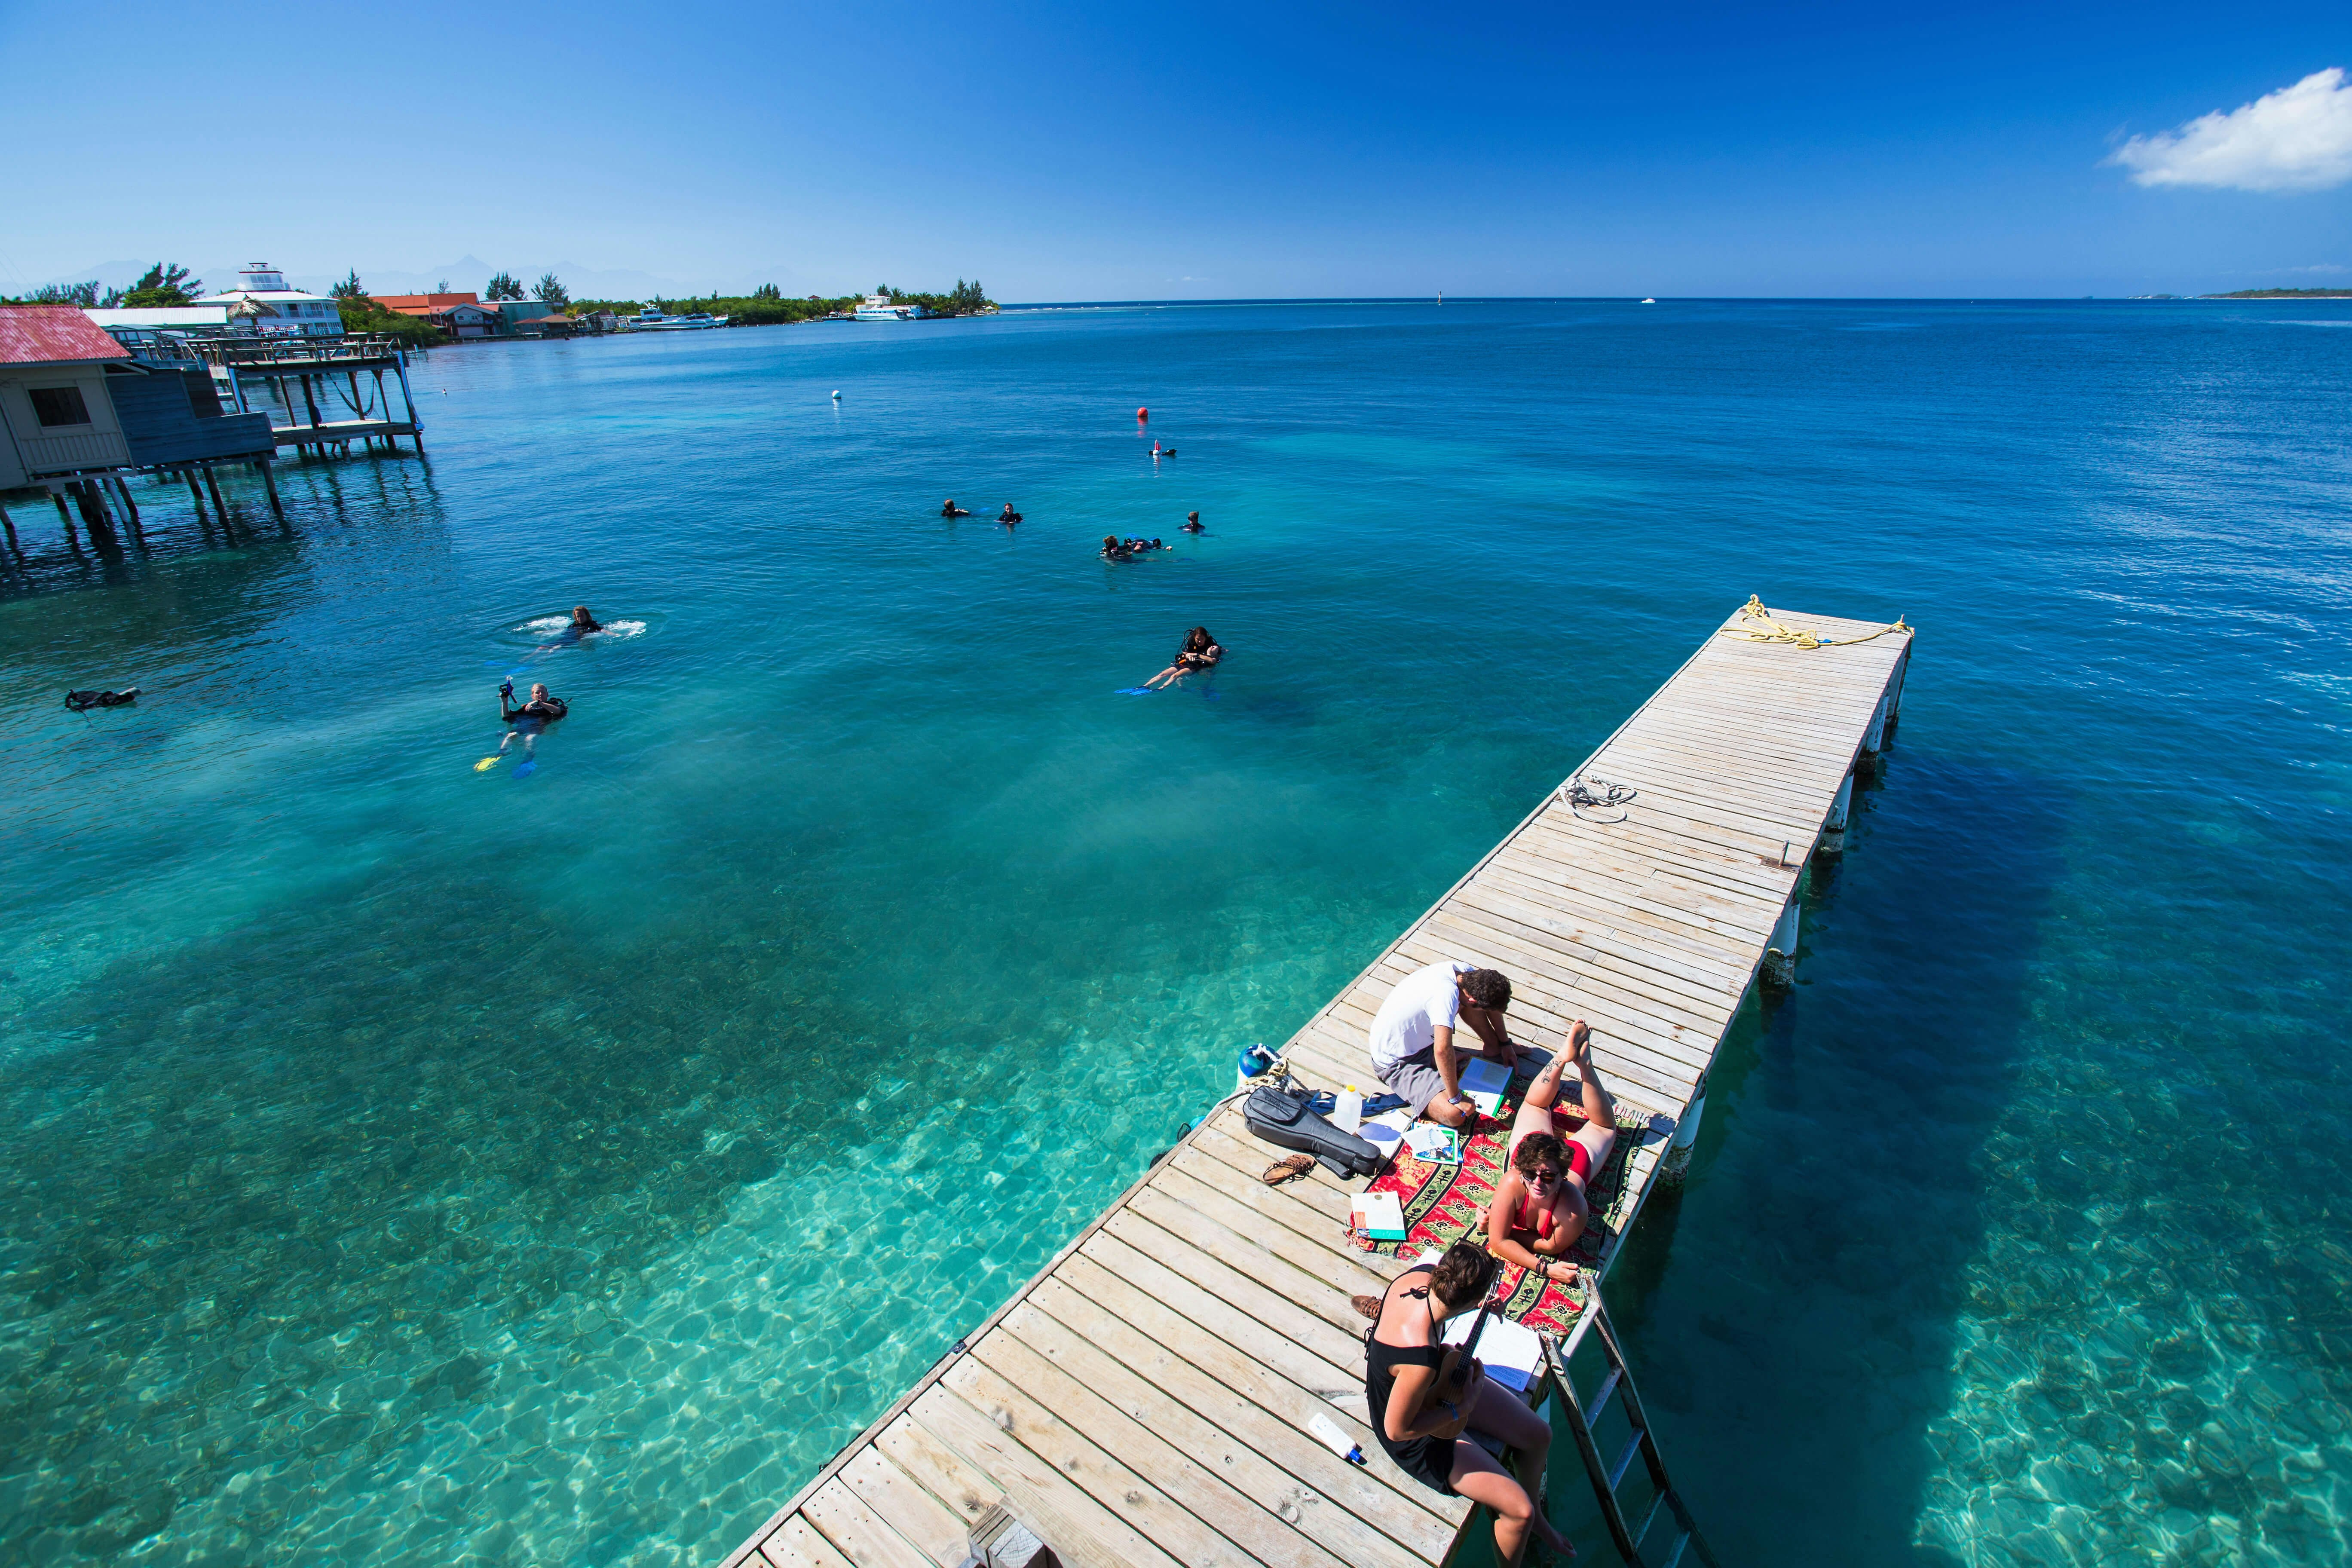 Girls play music in the sun on a Utila dock with snorkelers in the water behind them